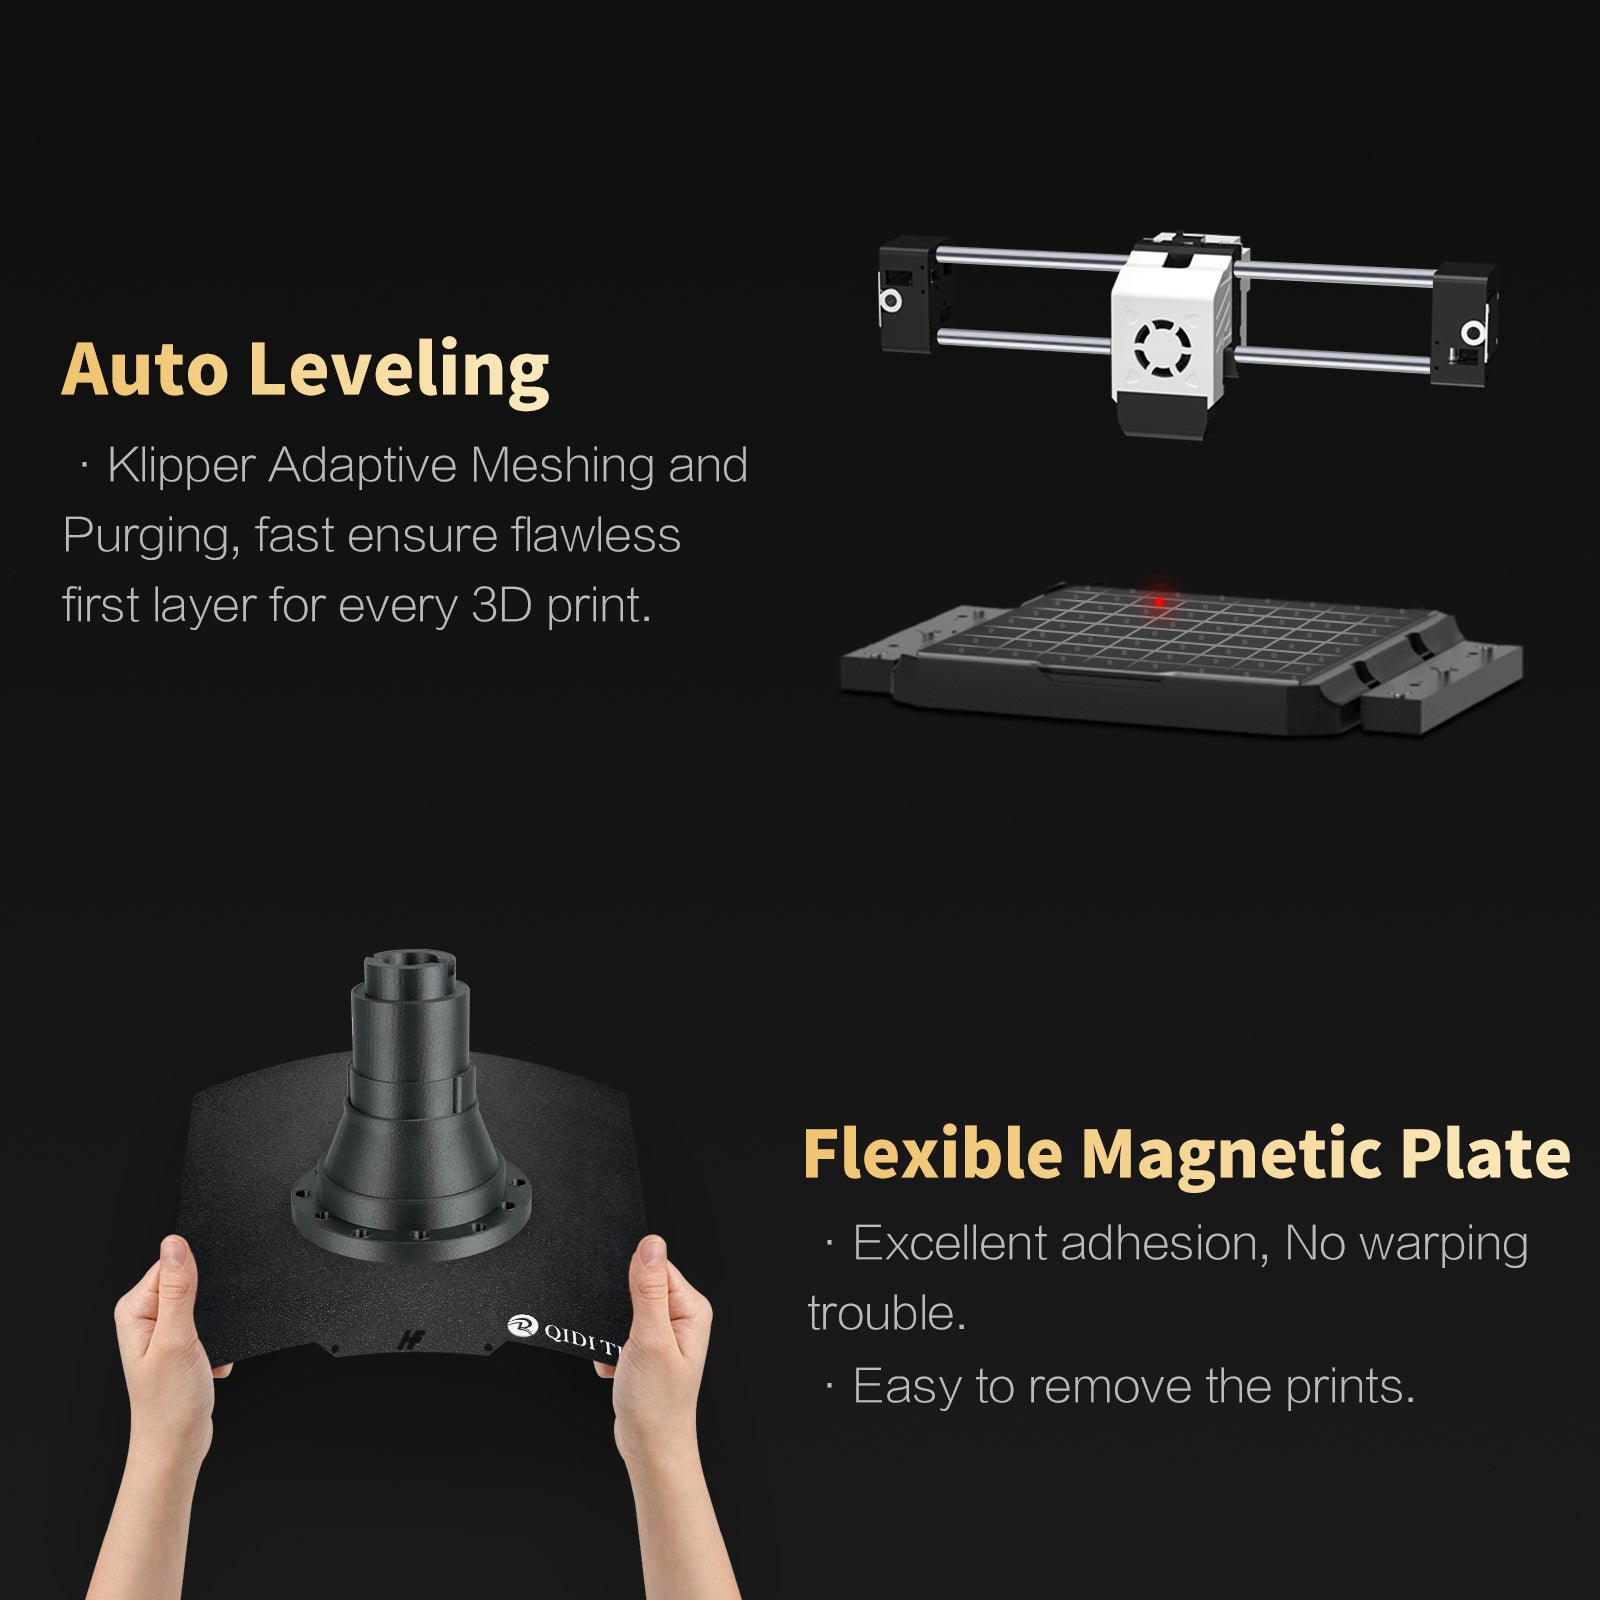 Auto Leveling, Flexible magnetic plate